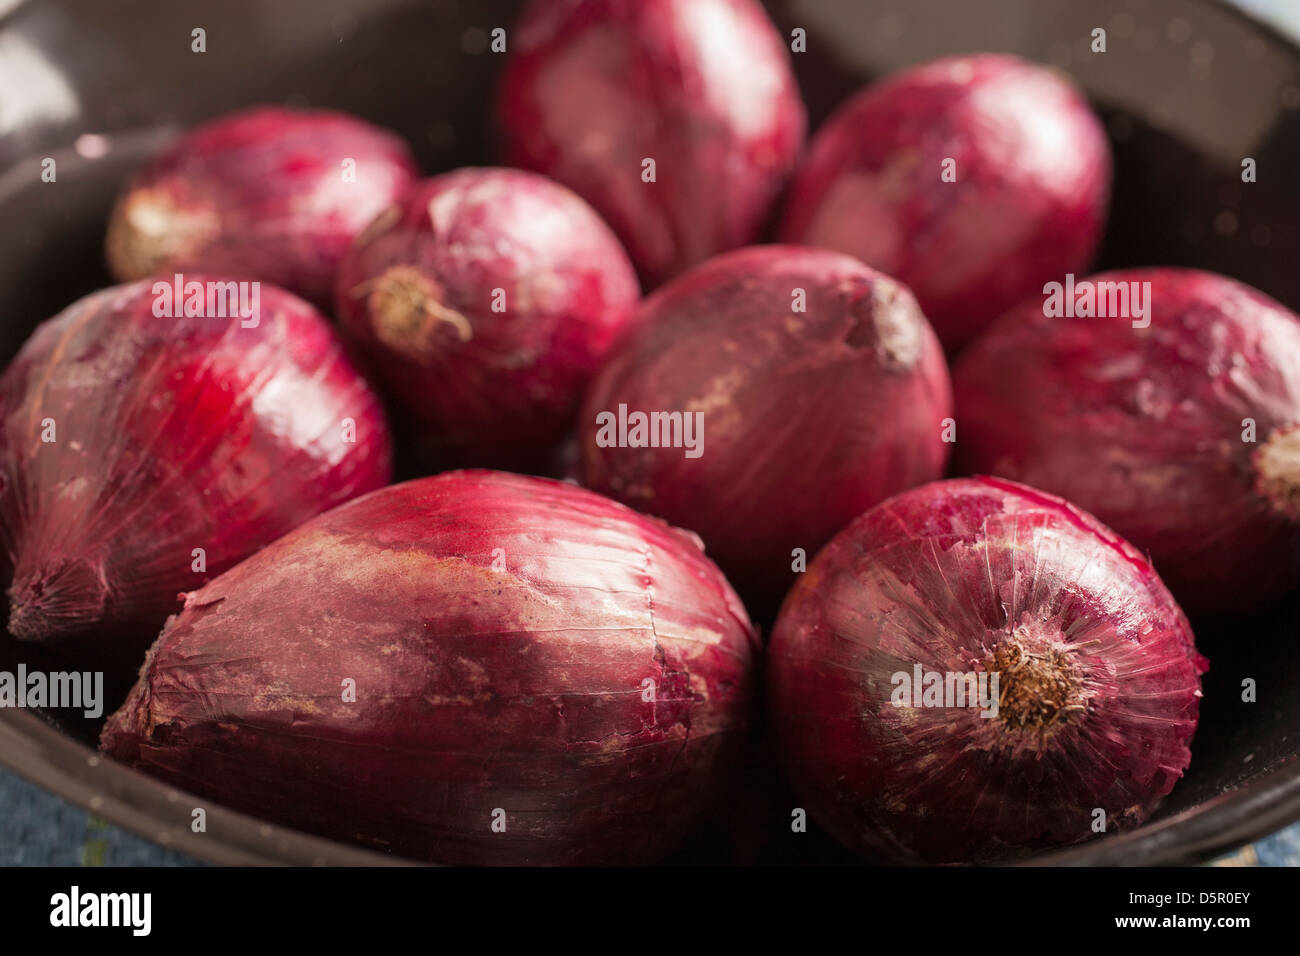 whole red onions Stock Photo